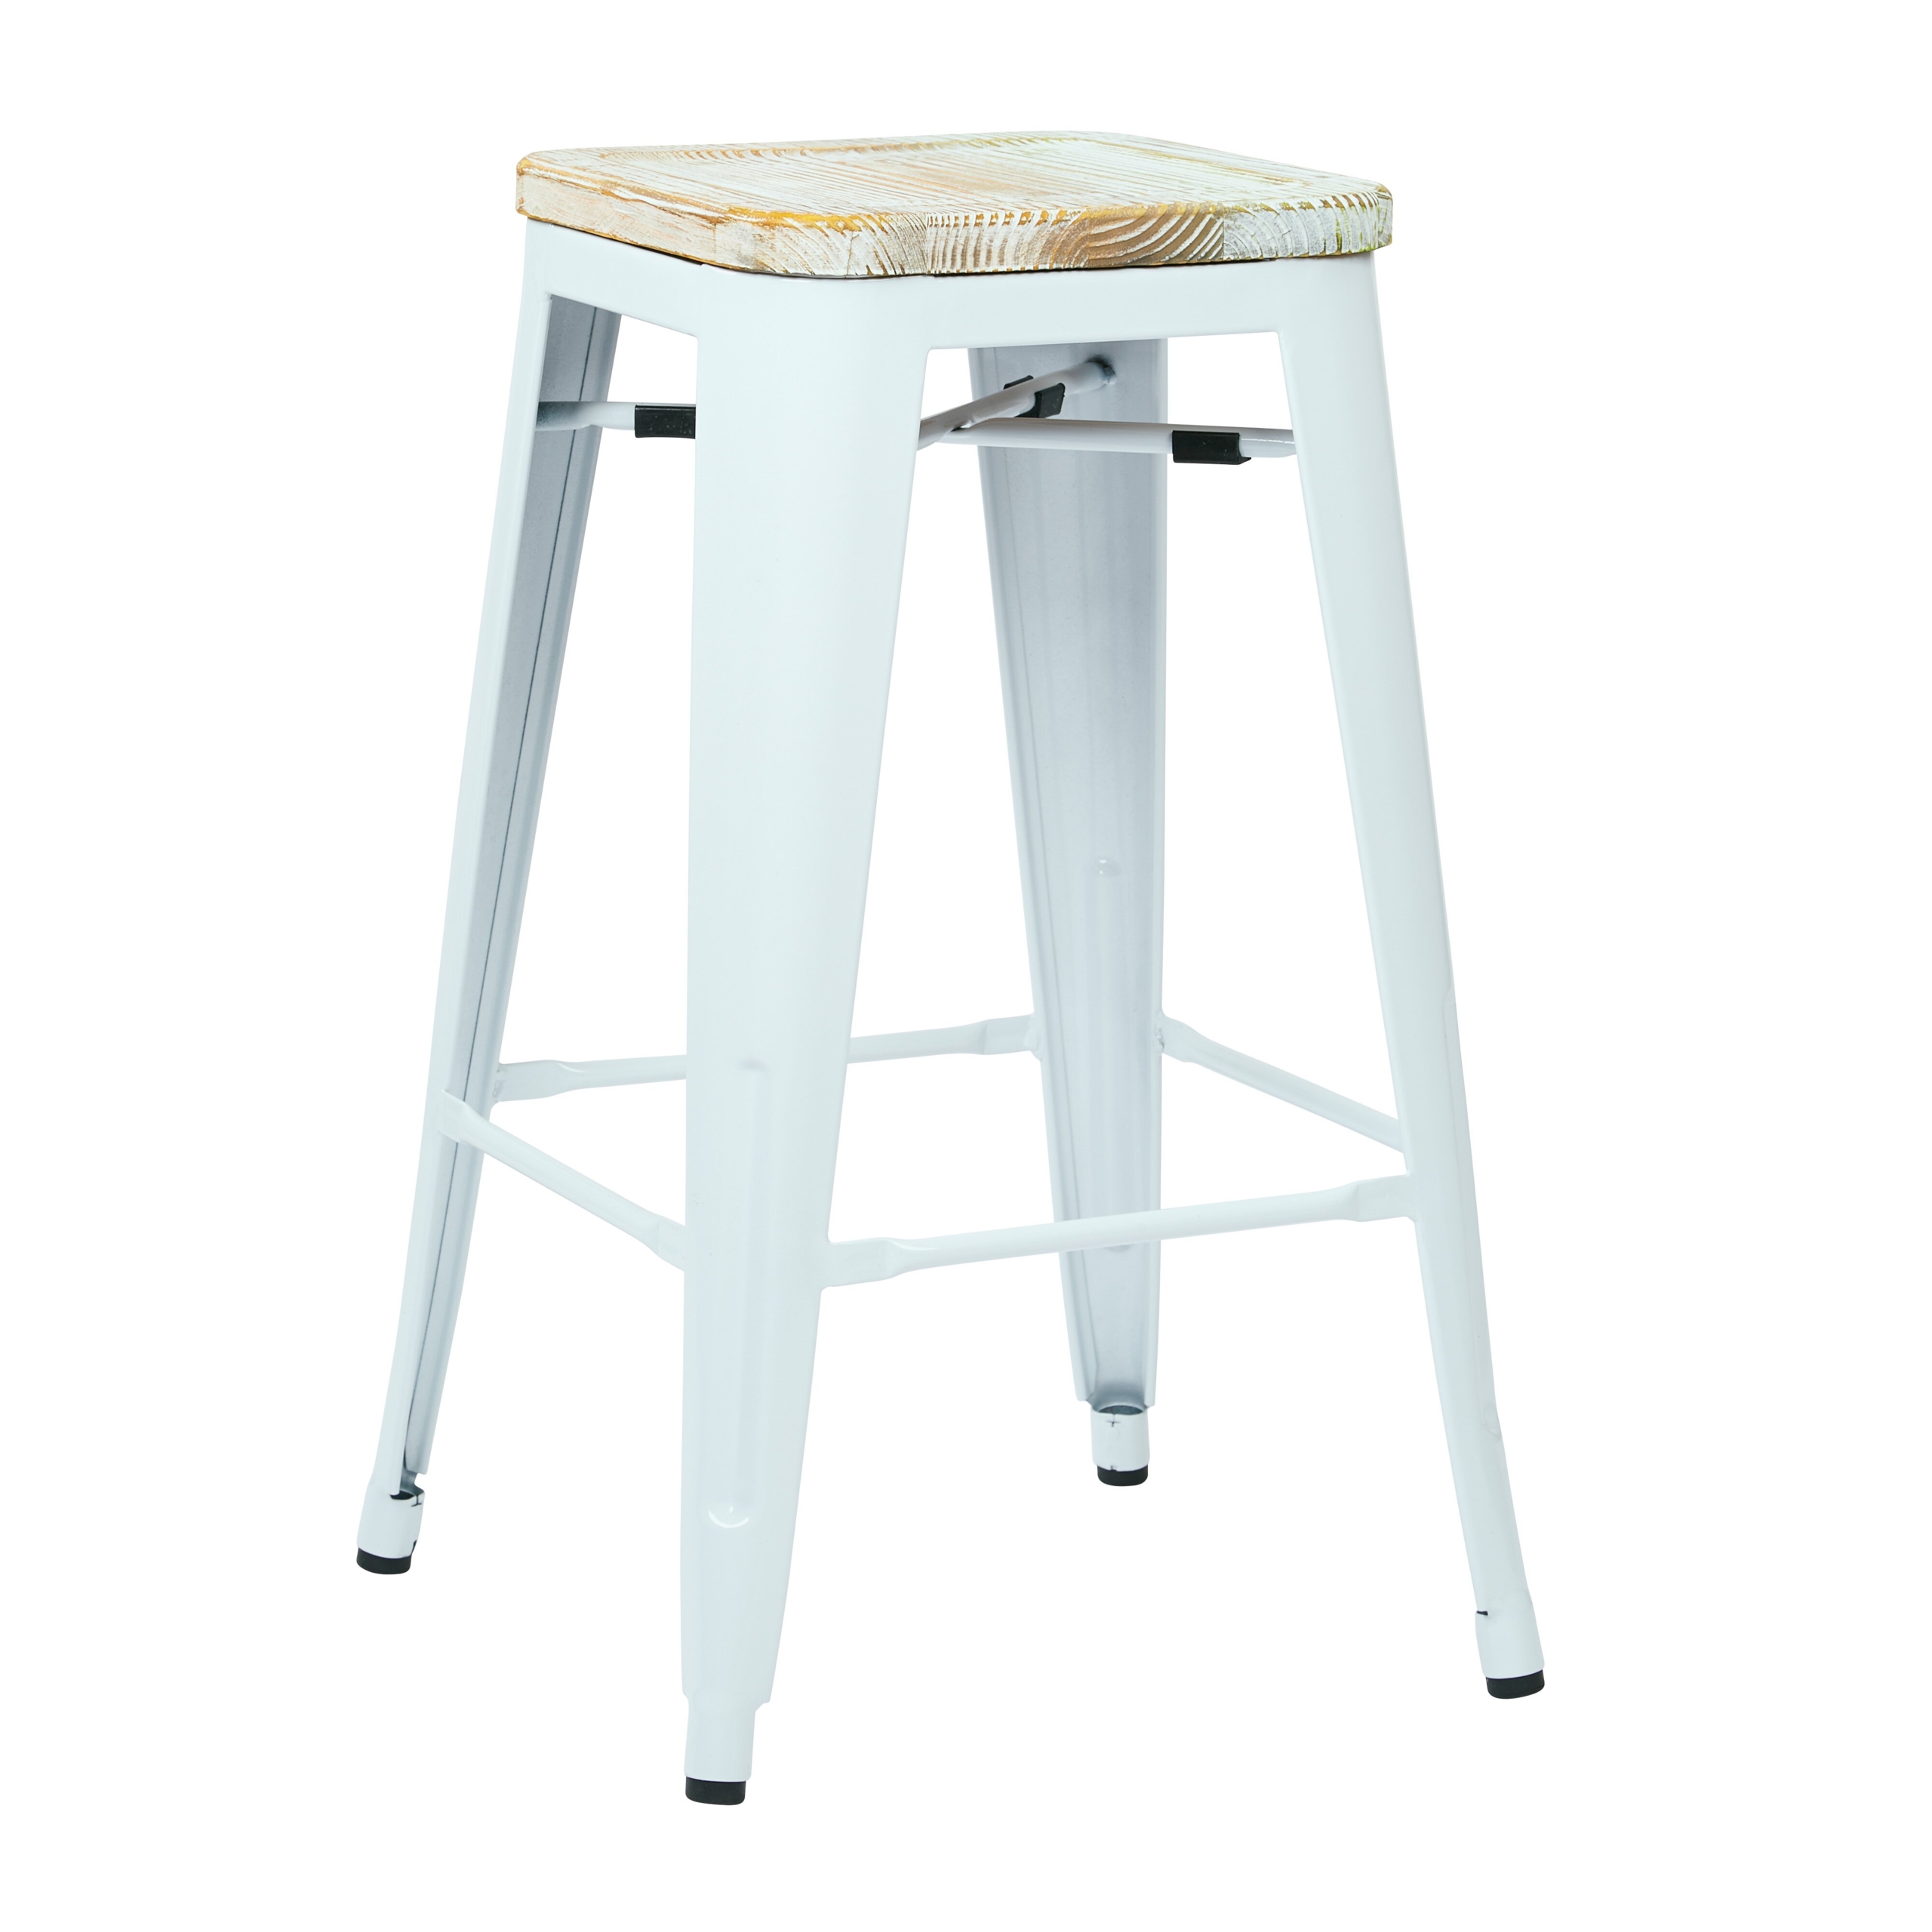 OSP Designs Bristow 26-Inch White Frame Antique Metal Barstool with Vintage Wood Seat, Ash Yellow Stone, 4-Pack